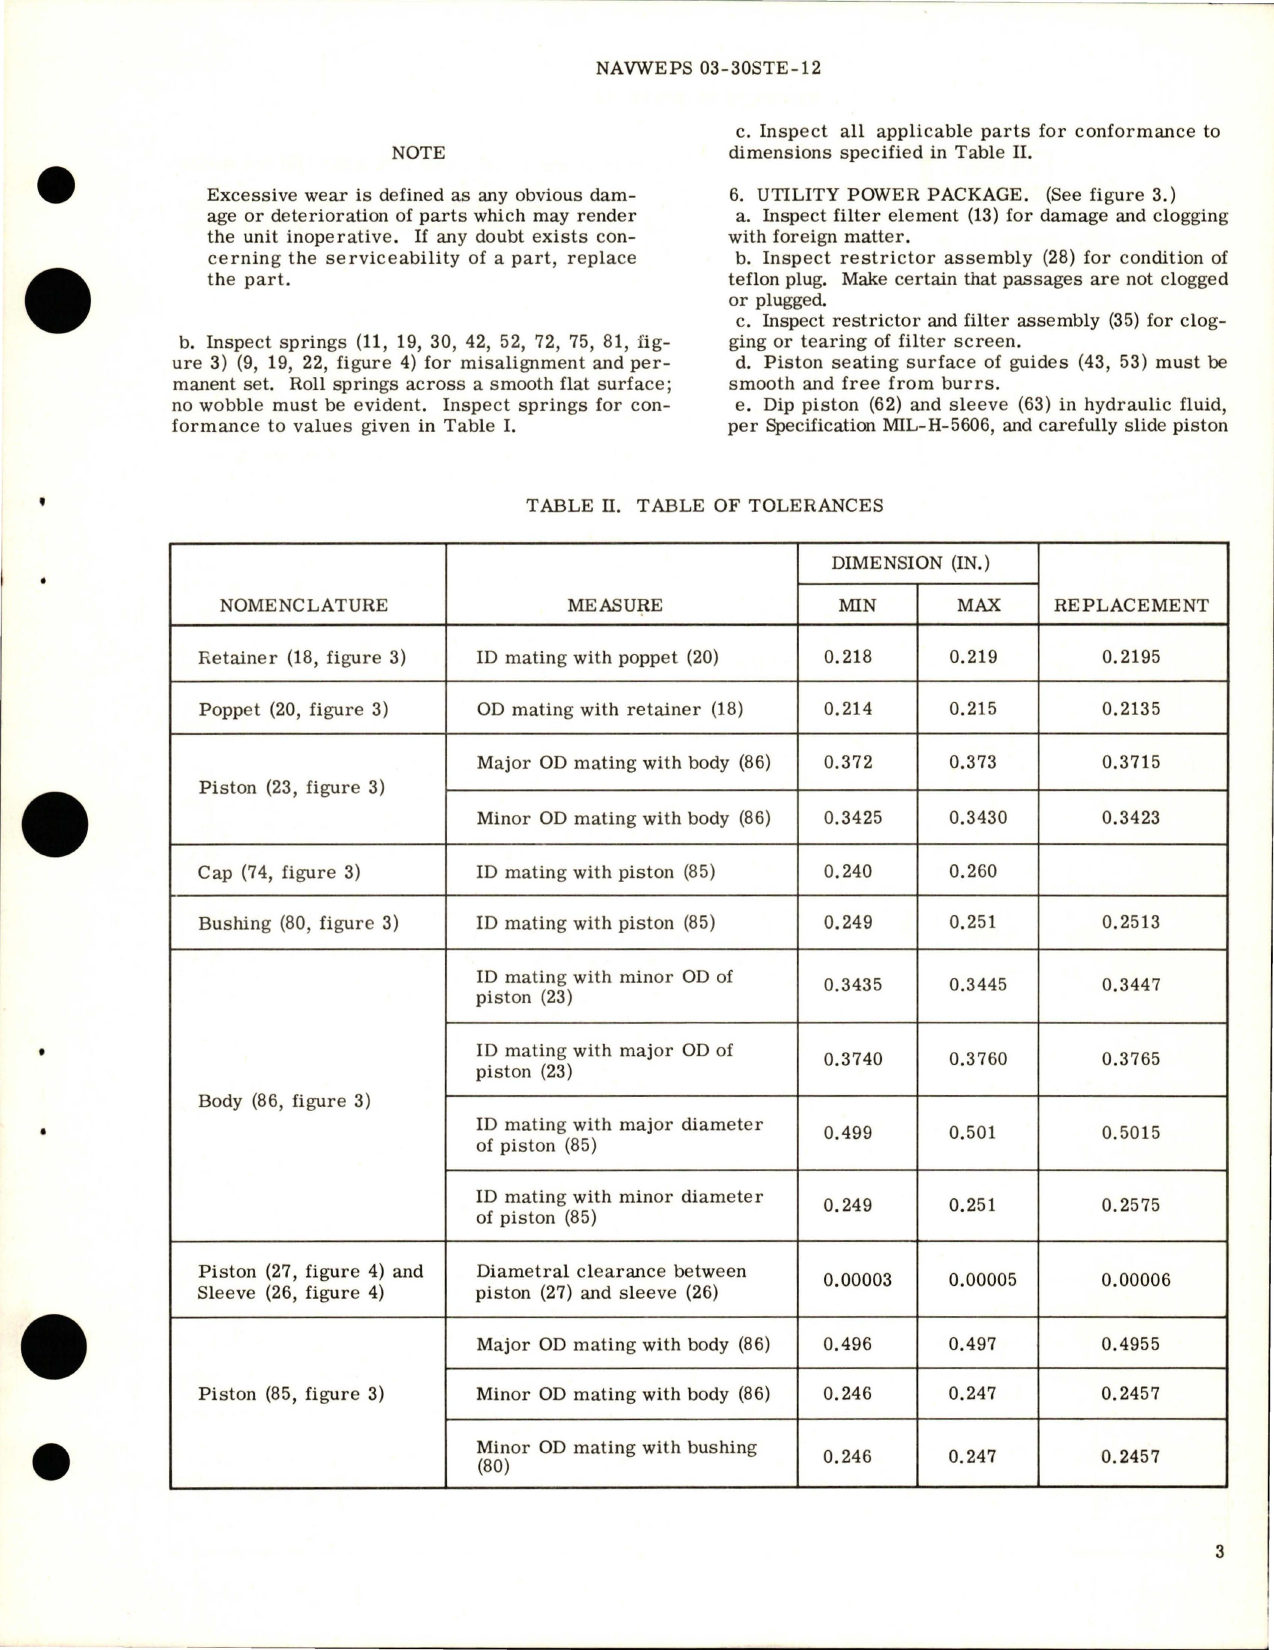 Sample page 5 from AirCorps Library document: Overhaul Instructions with Parts Breakdown for Utility Power Package - 3000 PSIG-10GPM - Part 12140-3R10-1 and 12140-3N10-1 